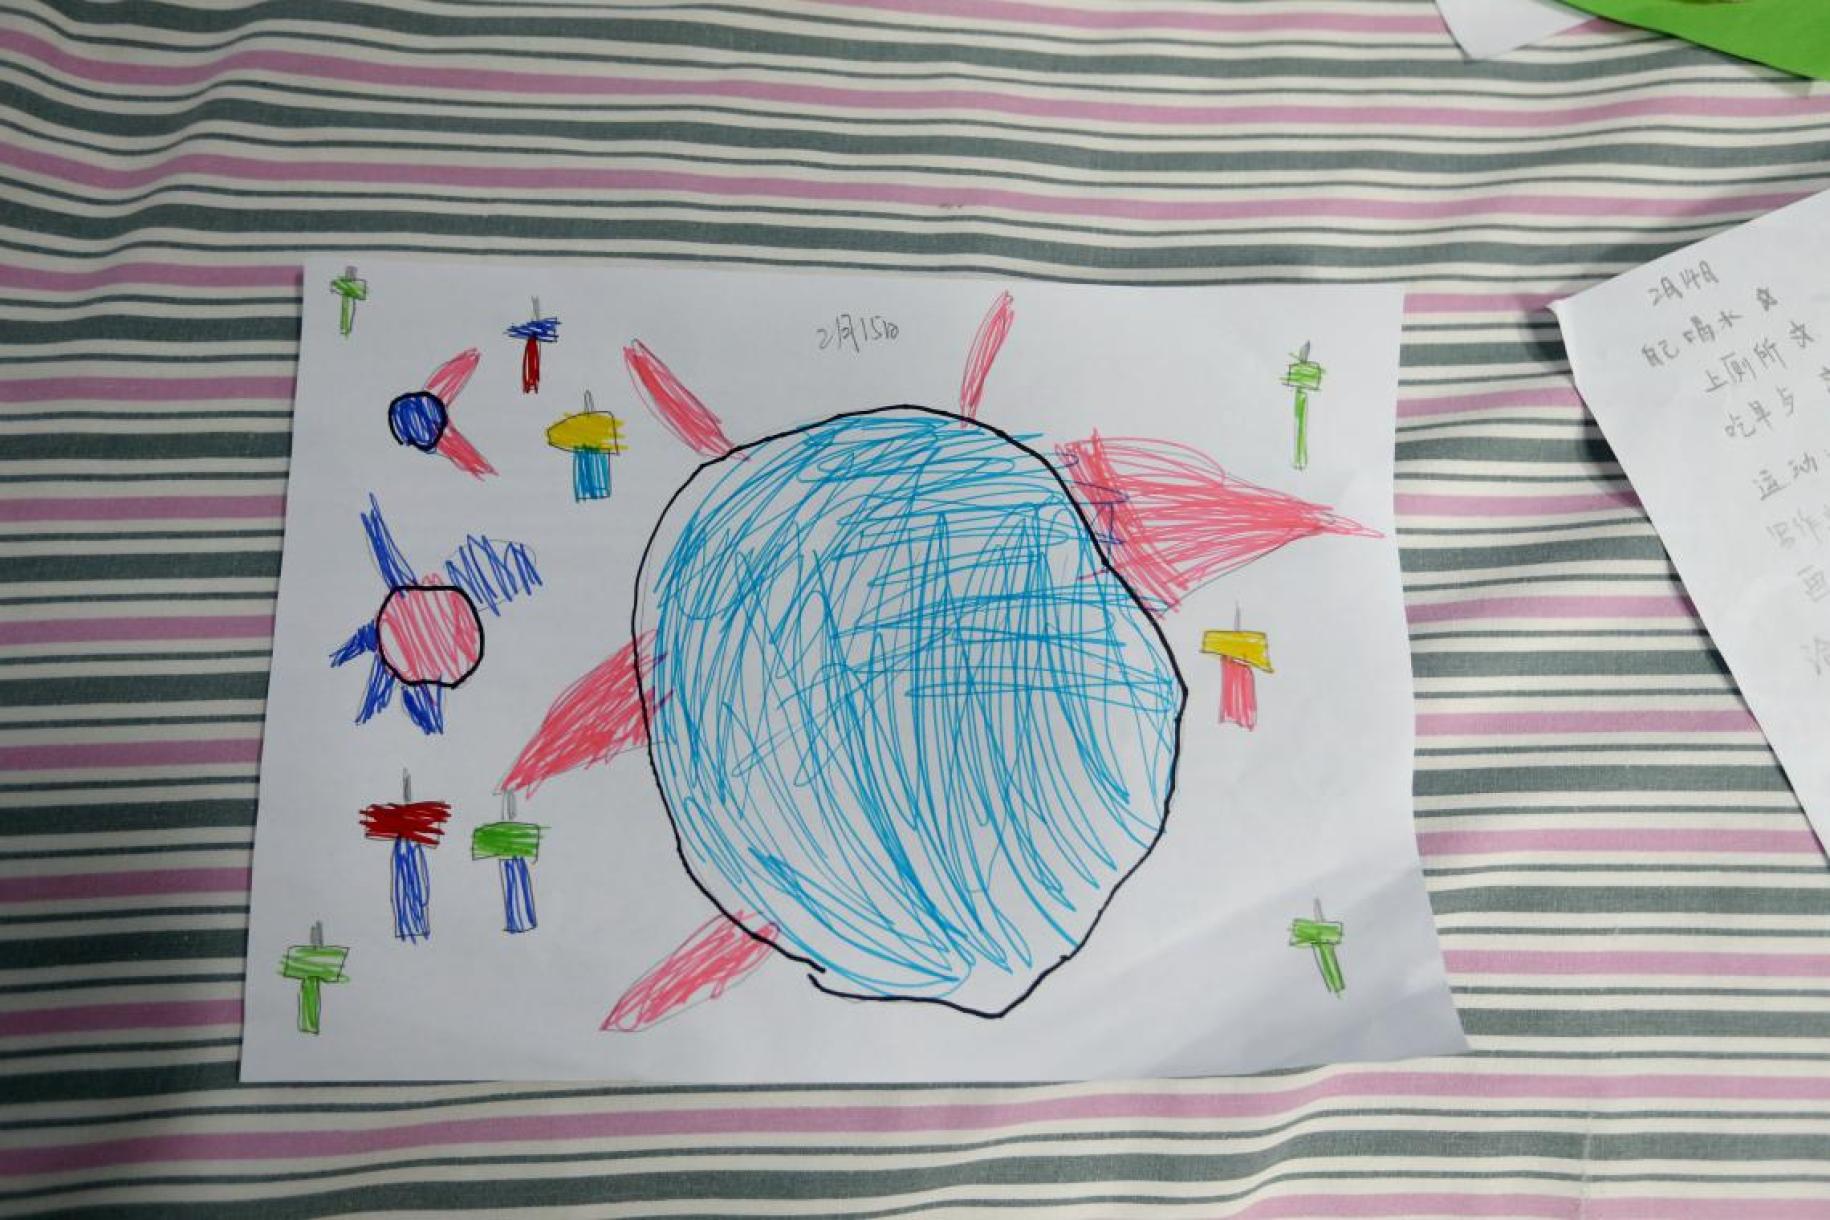 Child's drawing of the coronavirus surrounded by hammers.